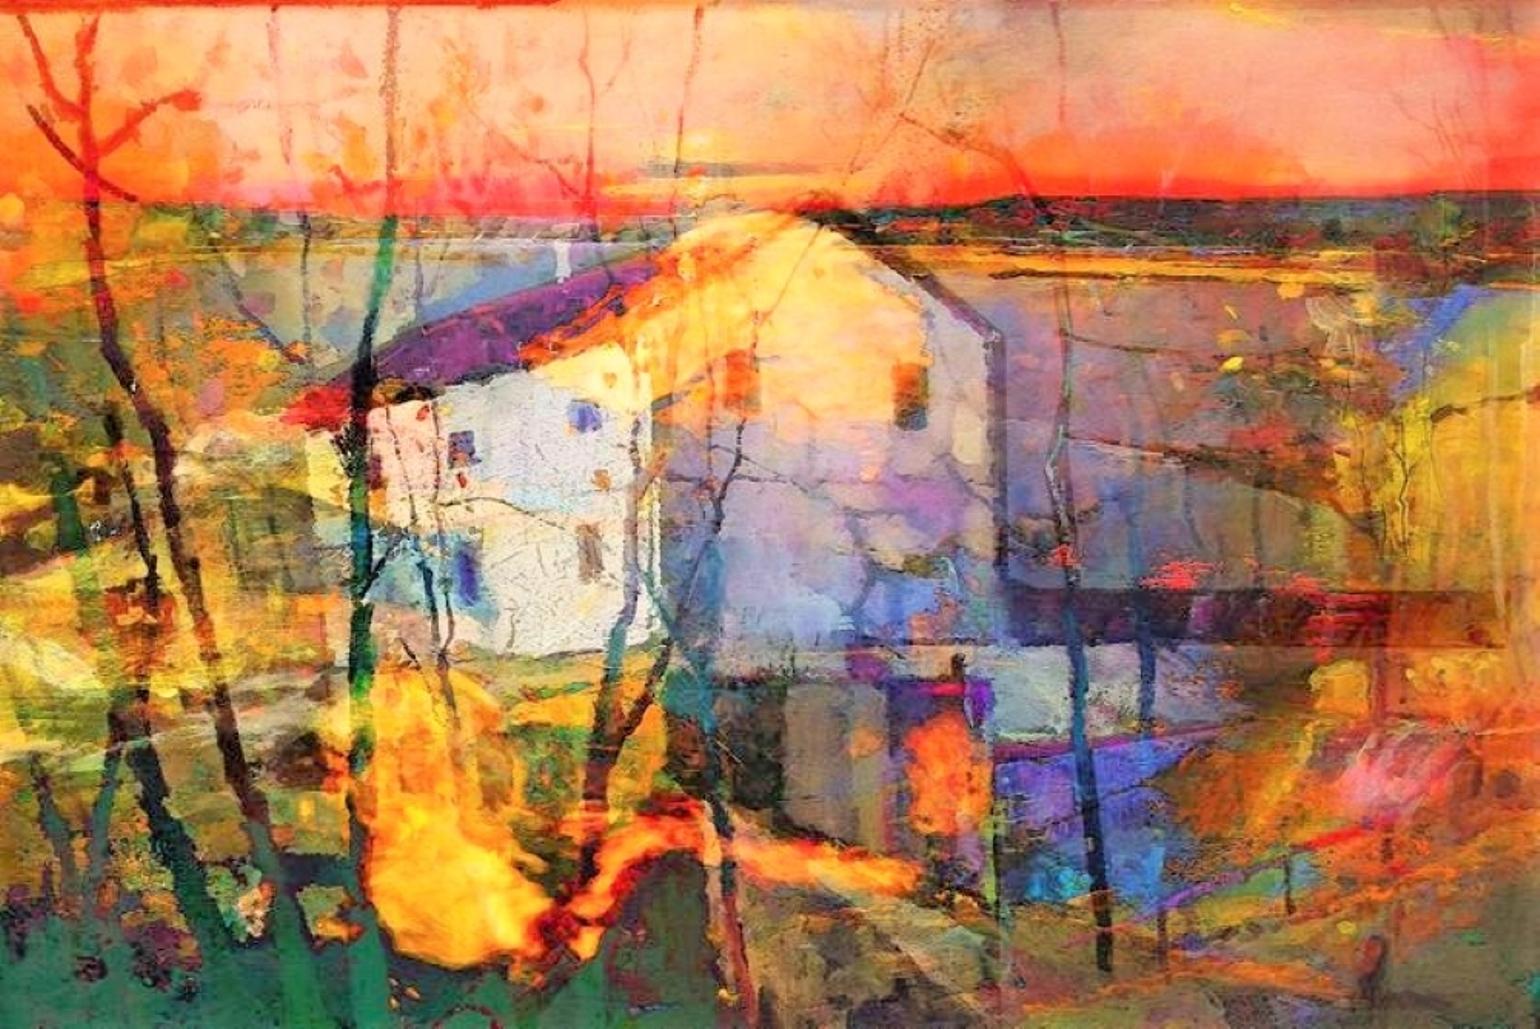 Landscape, Acrylic & Oil on Canvas by Indian Contemporary Artist "In Stock"